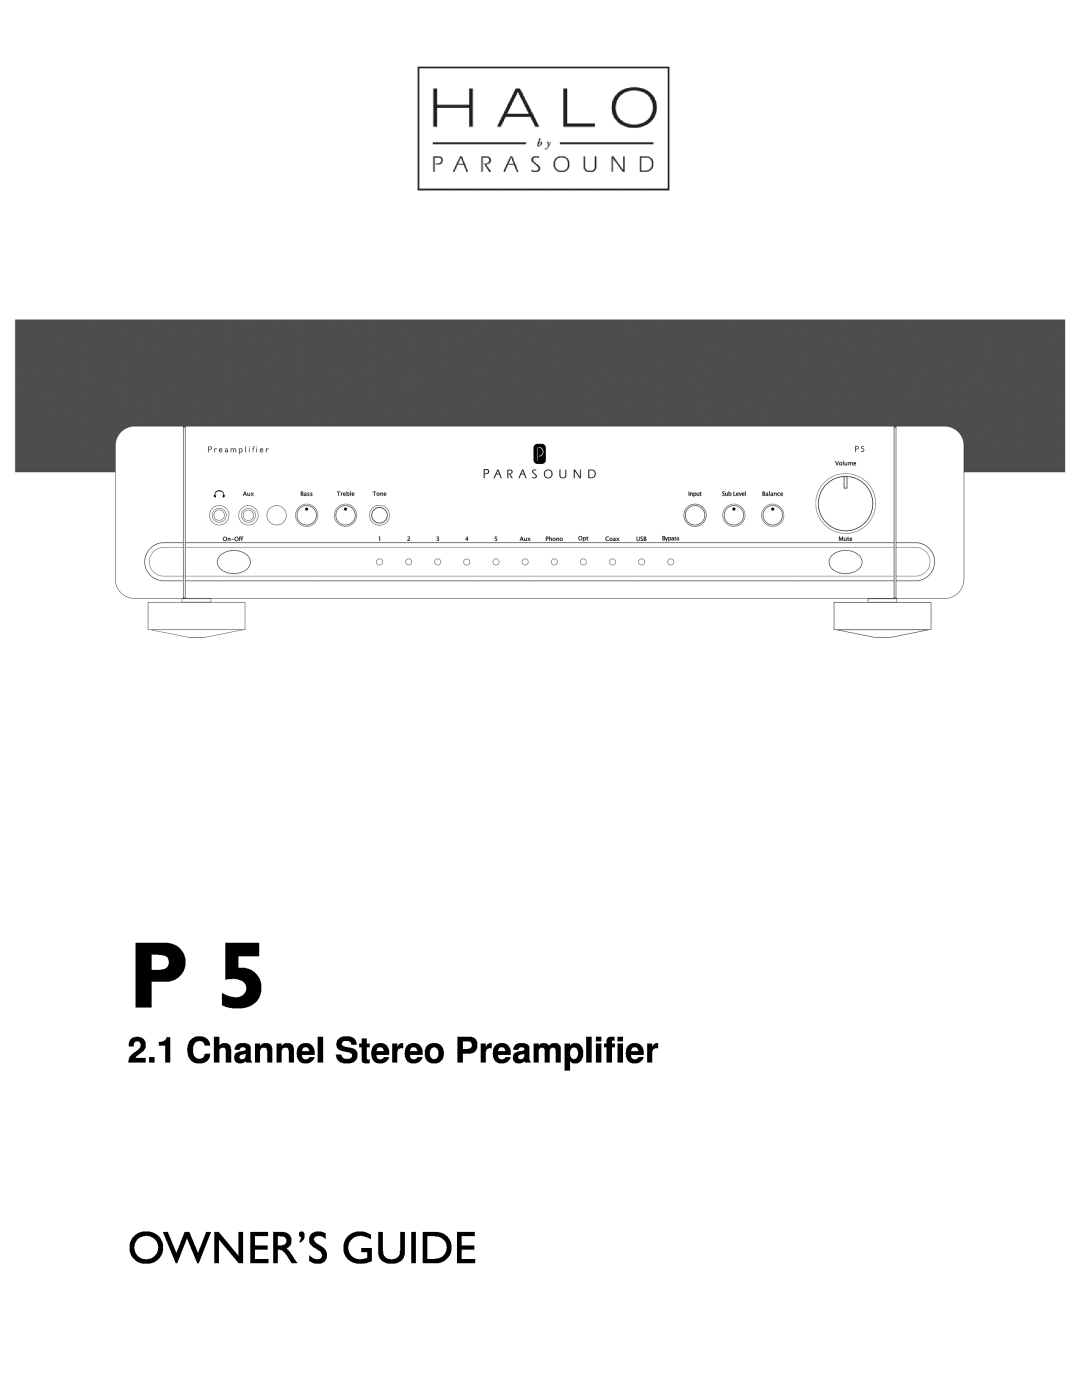 Parasound P 5 manual Owner’S Guide, Channel Stereo Preamplifier 